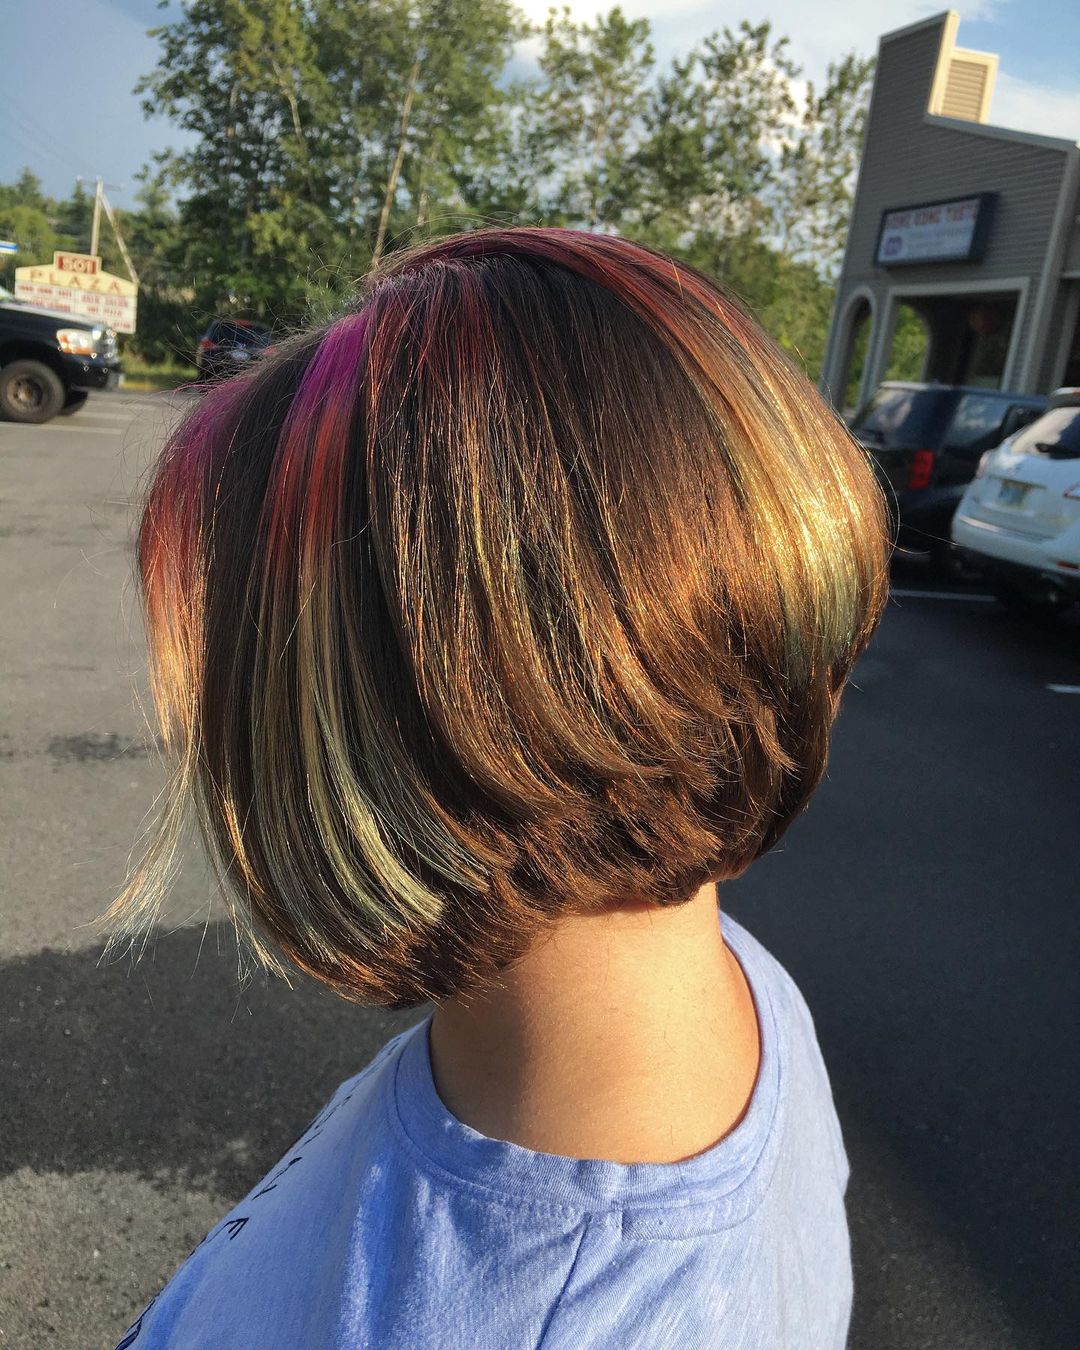 Stacked Bob 88 Long stacked bob | Medium length stacked bob | Pictures of stacked bob haircuts front and back Stacked Bob Hairstyles for Women